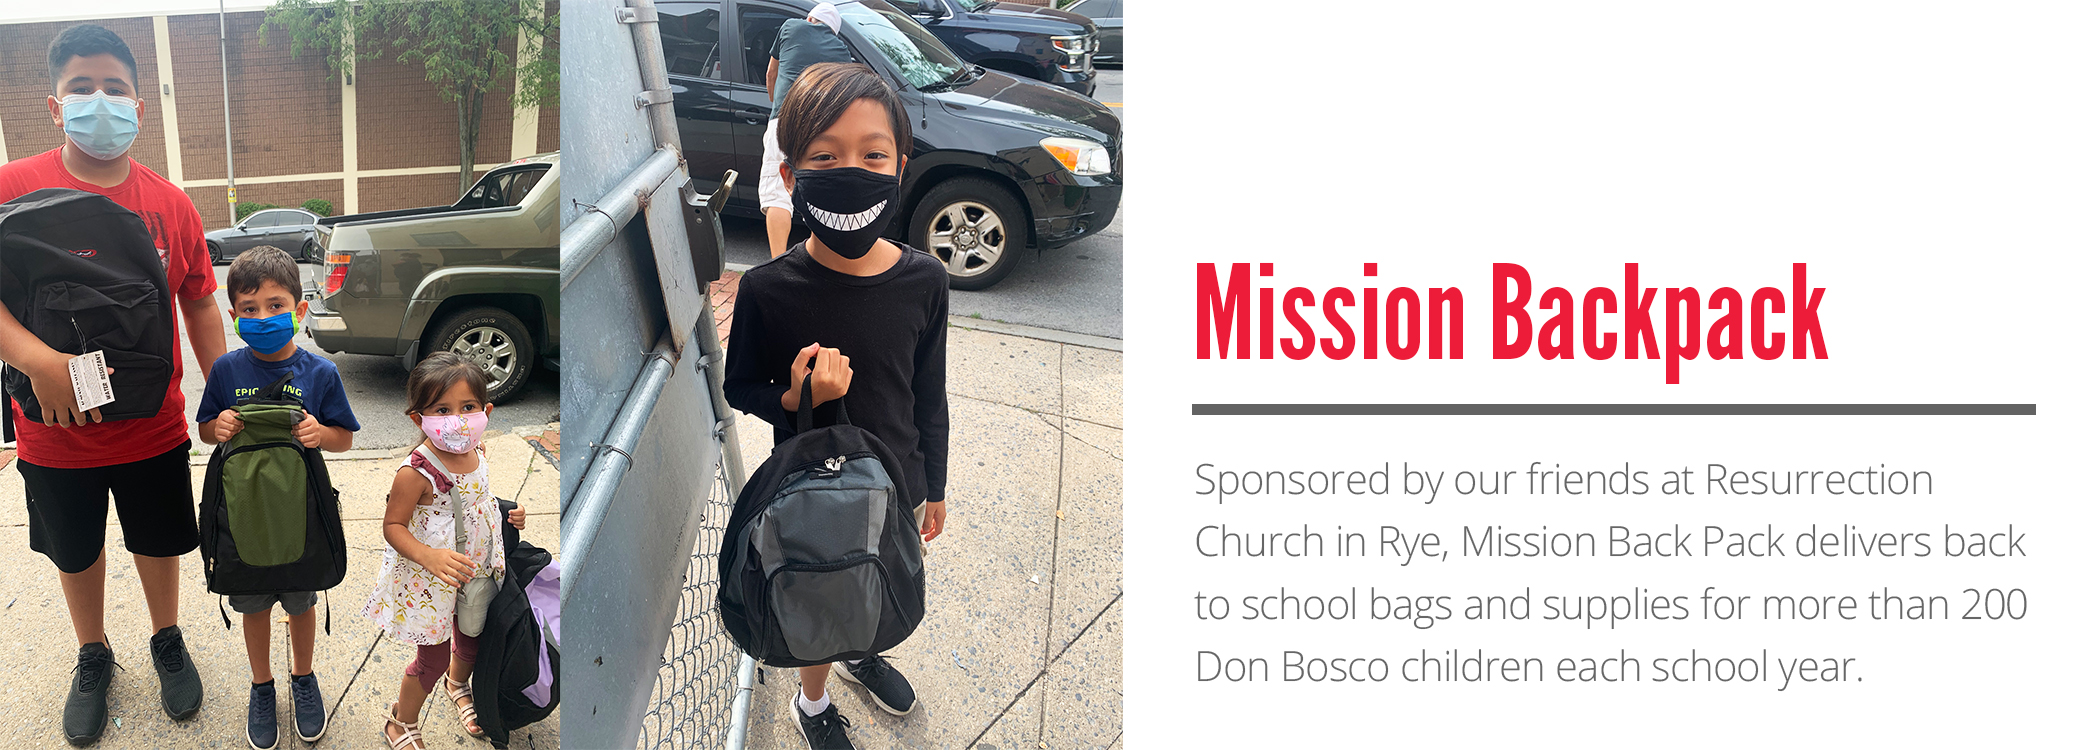 Mission Back Pack delivers back to school bags and supplies for more than 200 Don Bosco children each school year.